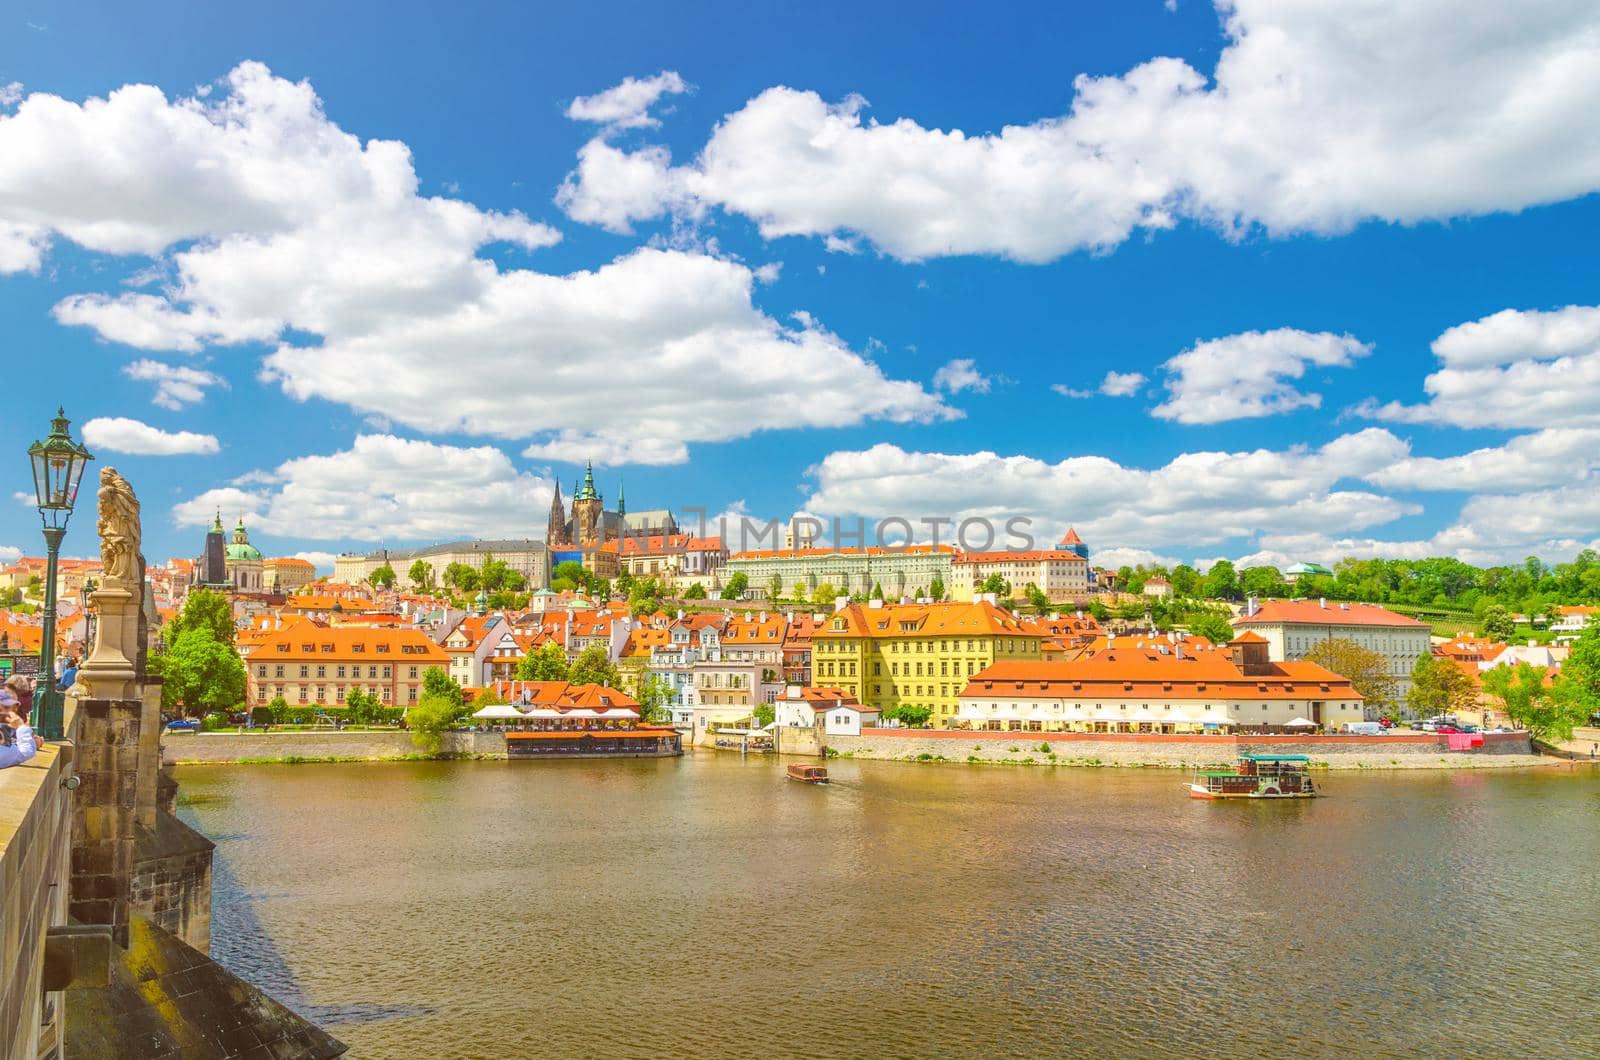 View of Prague old town, historical center with Prague Castle, St. Vitus Cathedral in Hradcany district, Charles Bridge Karluv Most over Vltava river, blue sky white clouds, Bohemia, Czech Republic